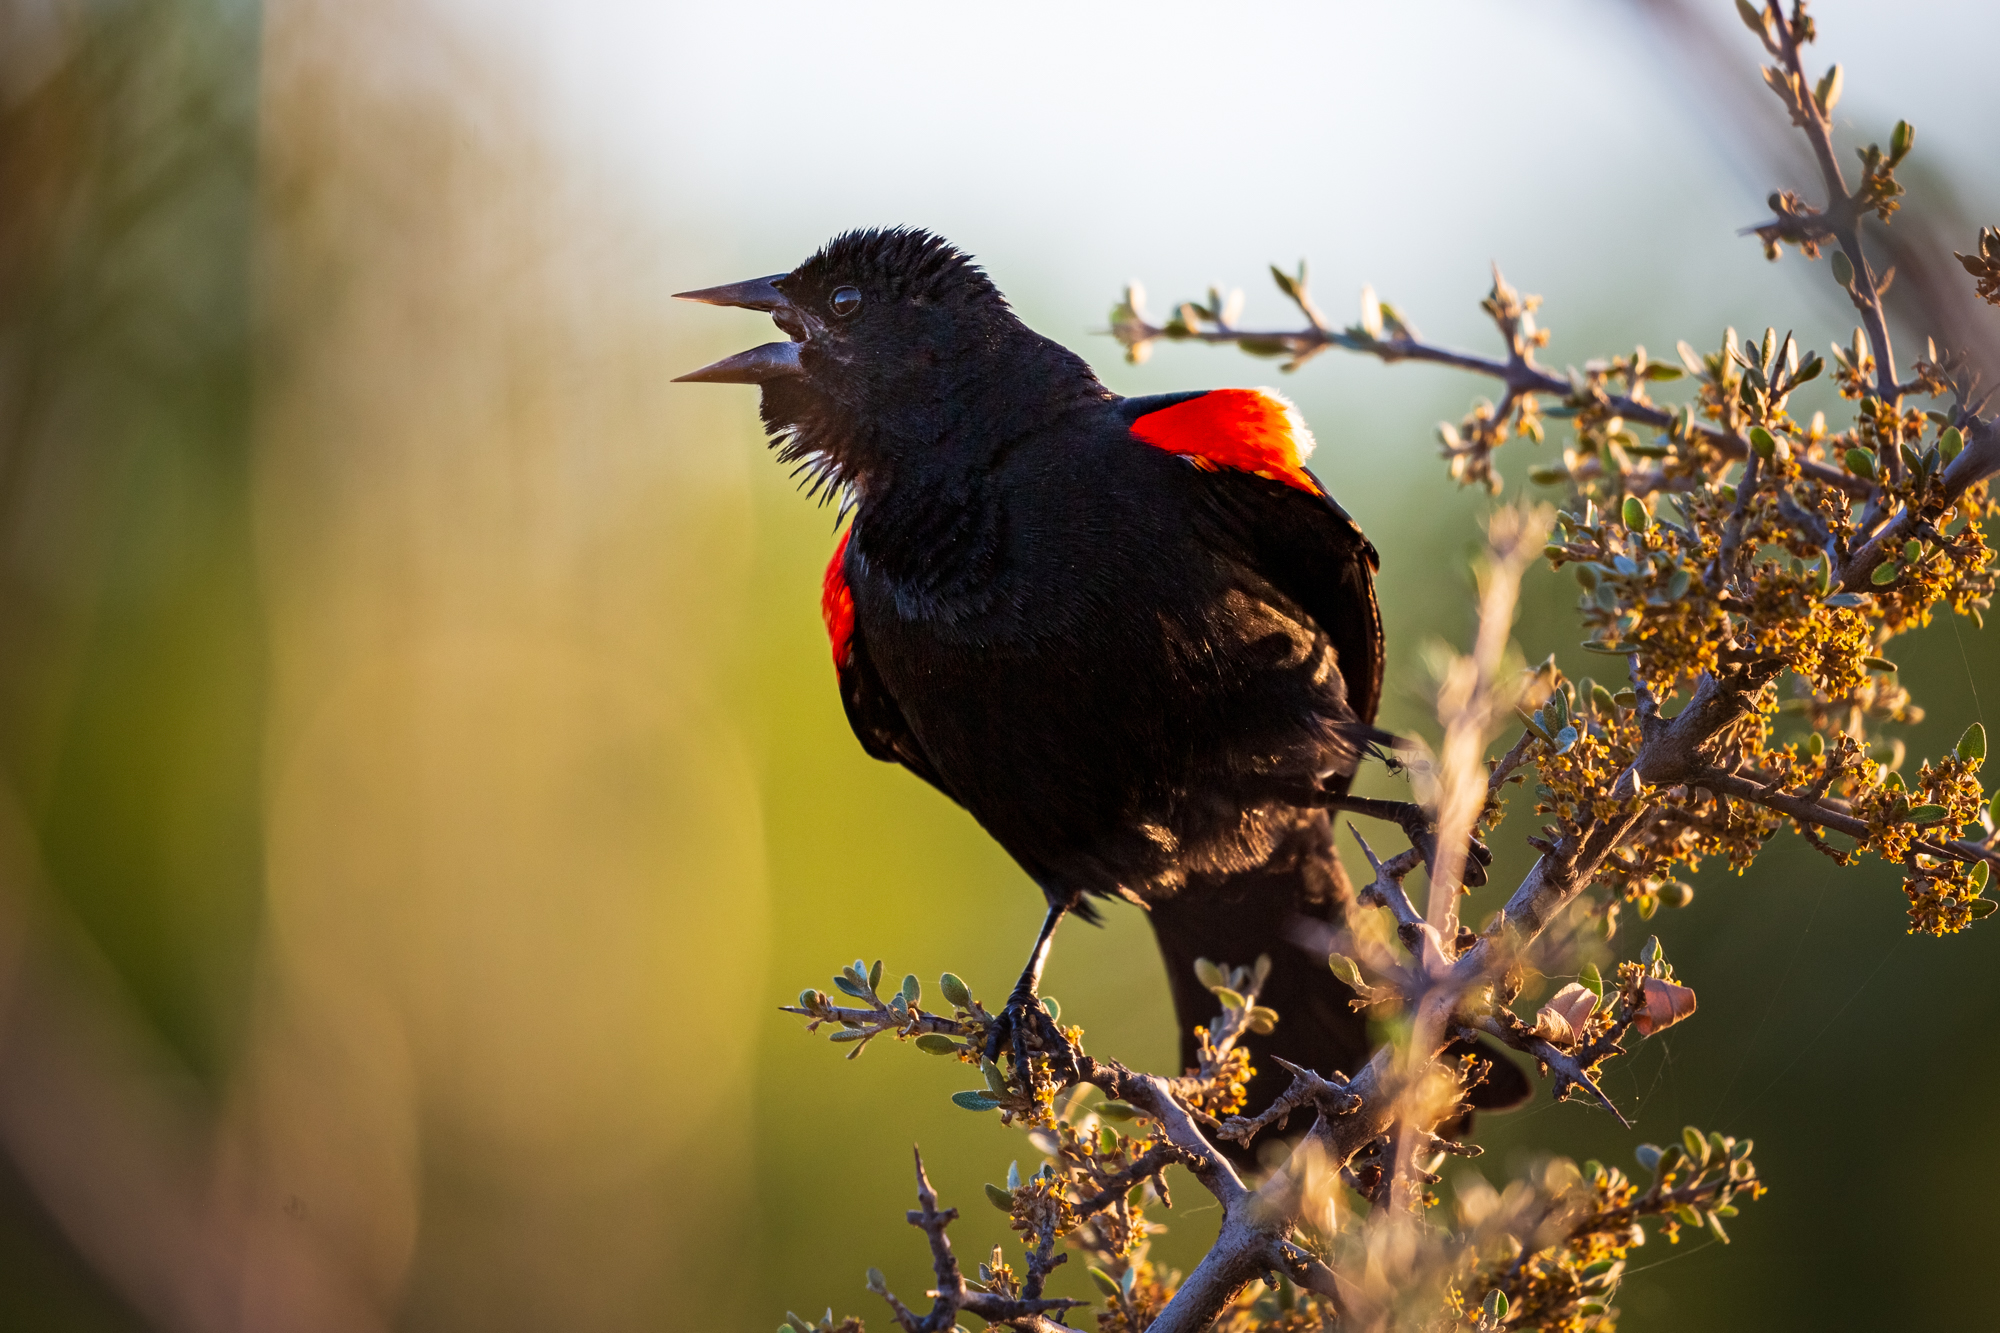 Red-winged Blackbird on a branch, singing